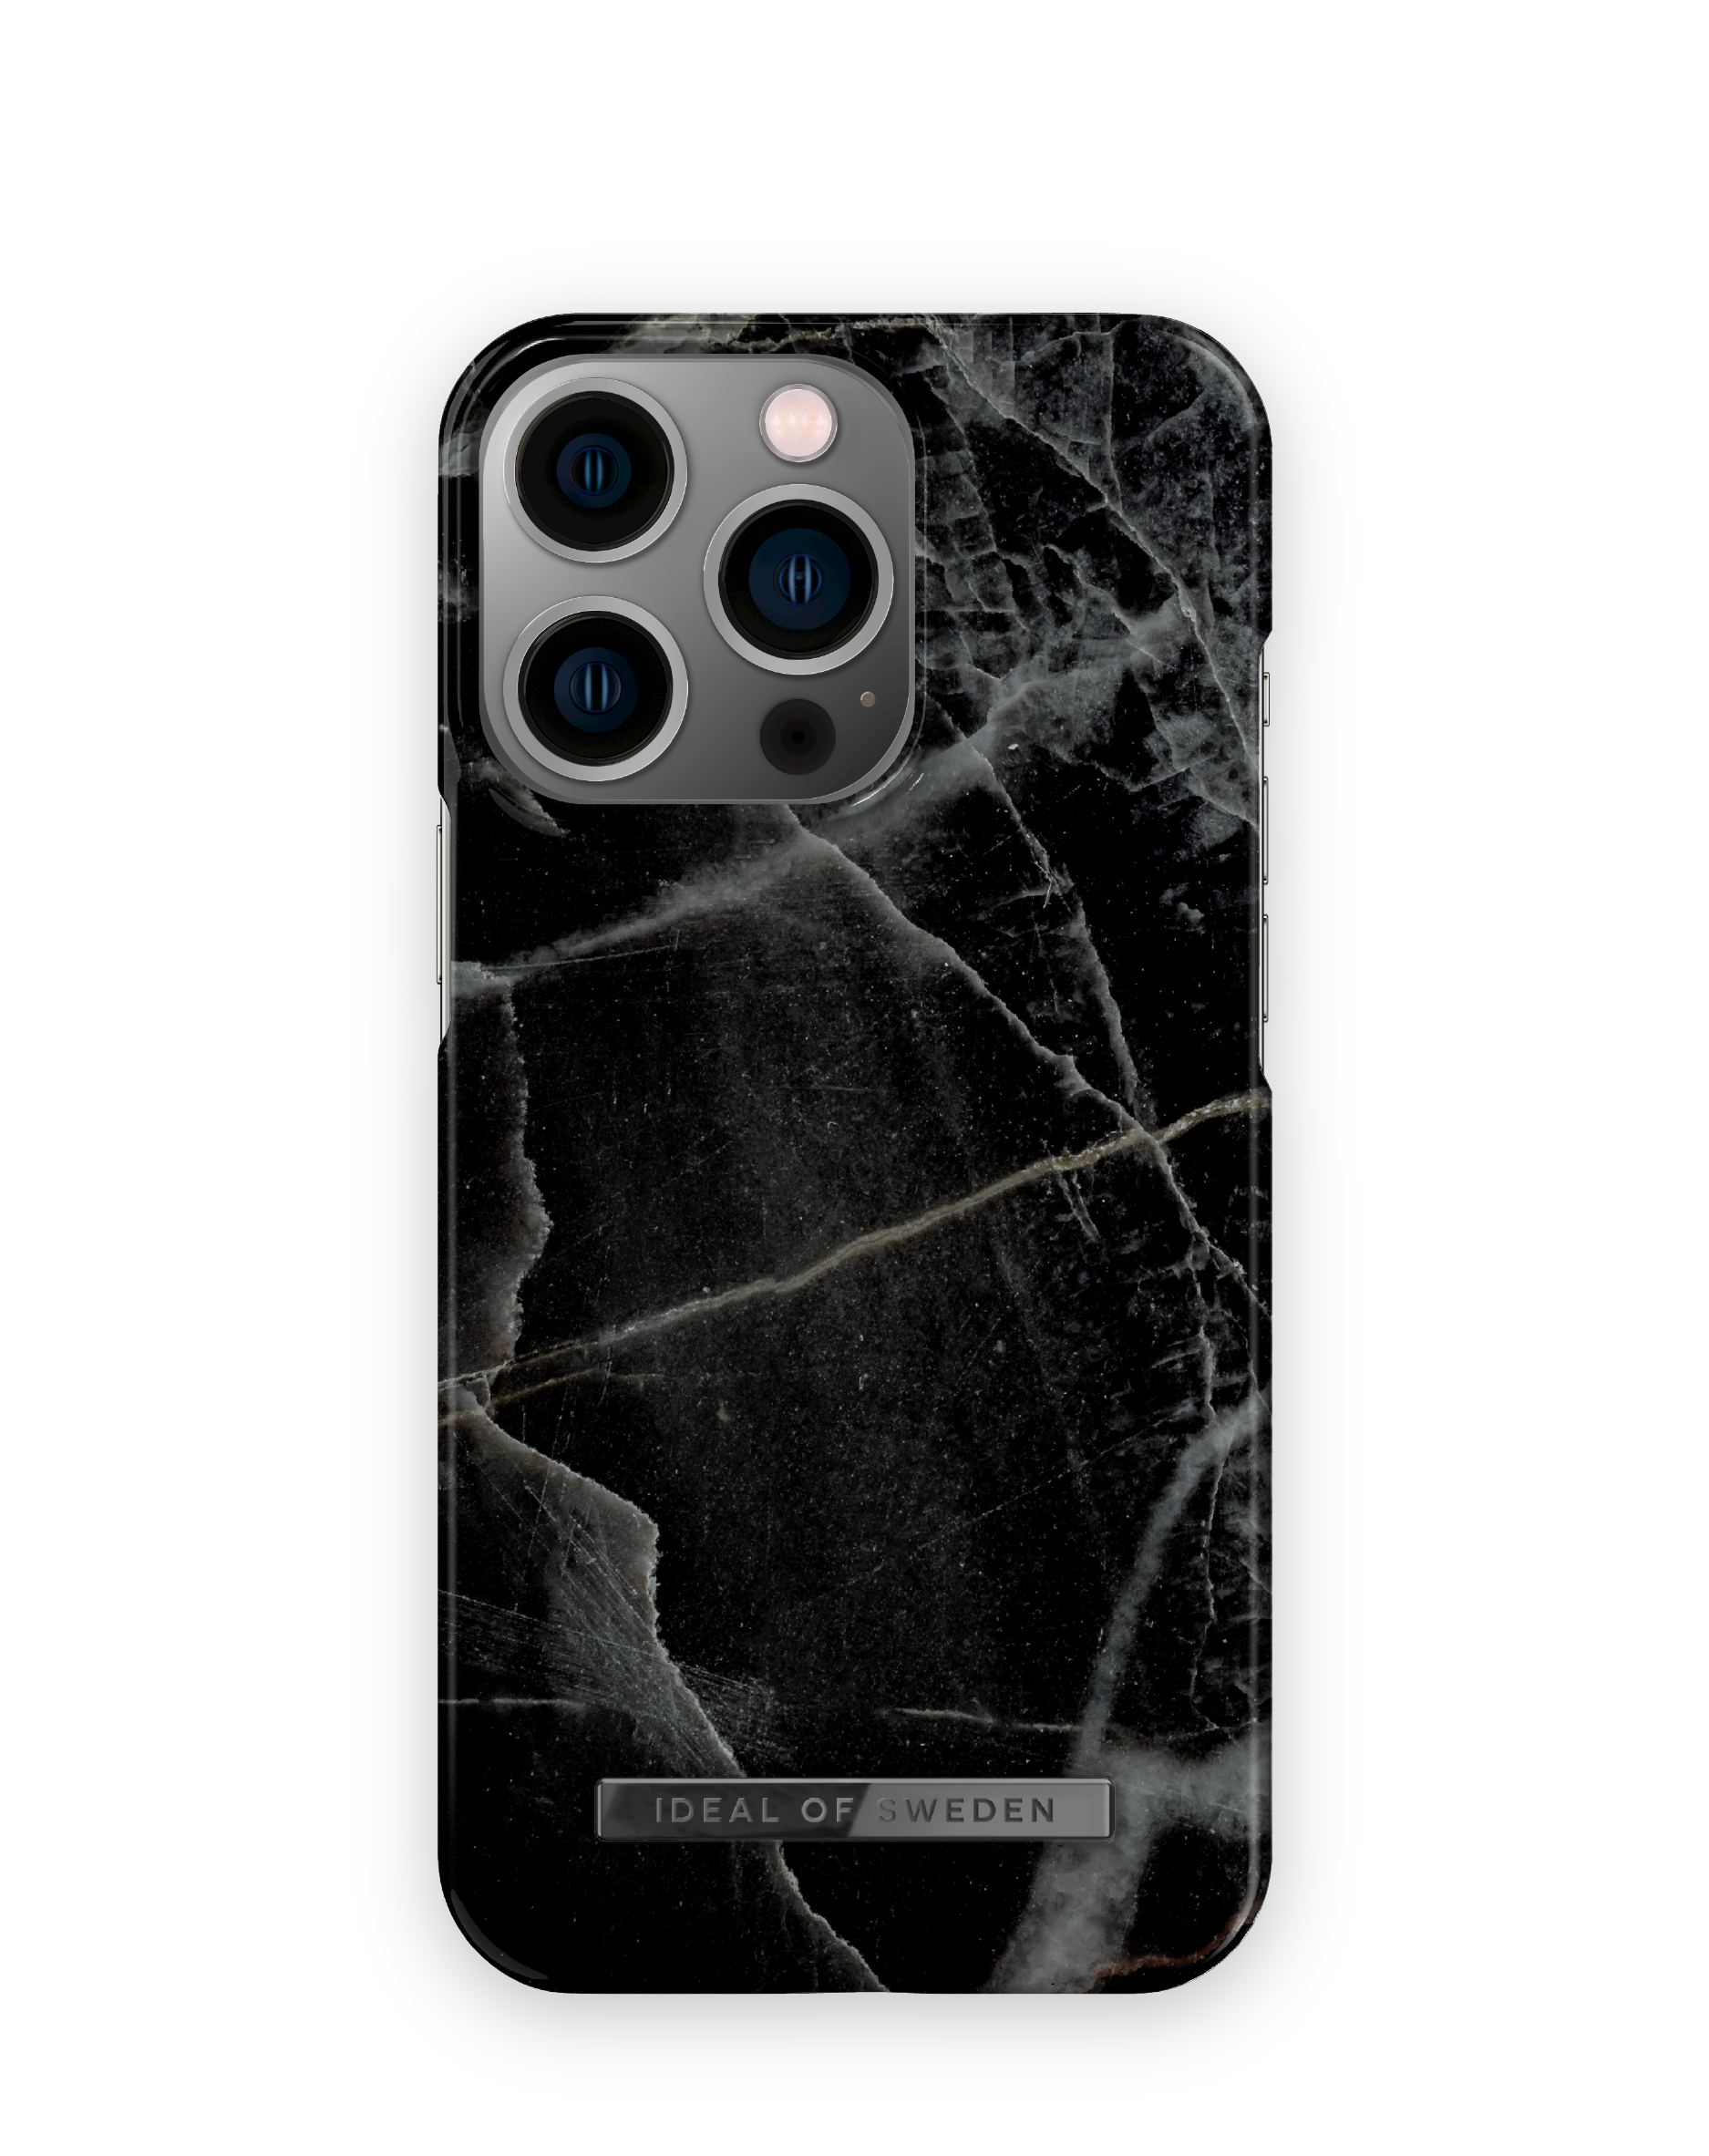 Pro, IDFCAW21-I2161P-358, 13 Black Apple, SWEDEN OF iPhone Backcover, Marble Thunder IDEAL